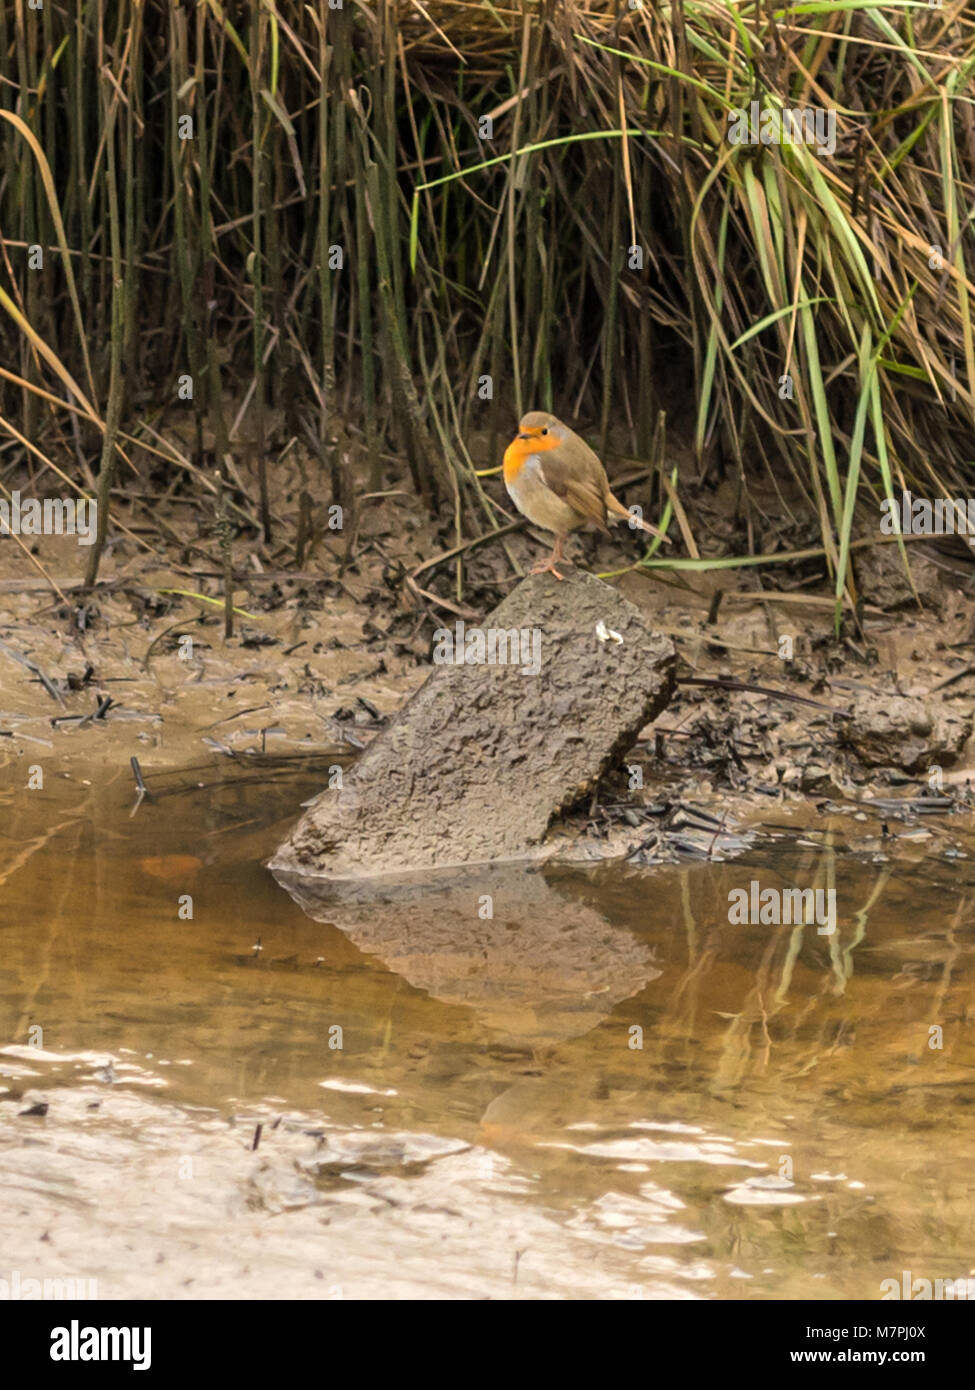 European Robin by the river bank portrait Stock Photo